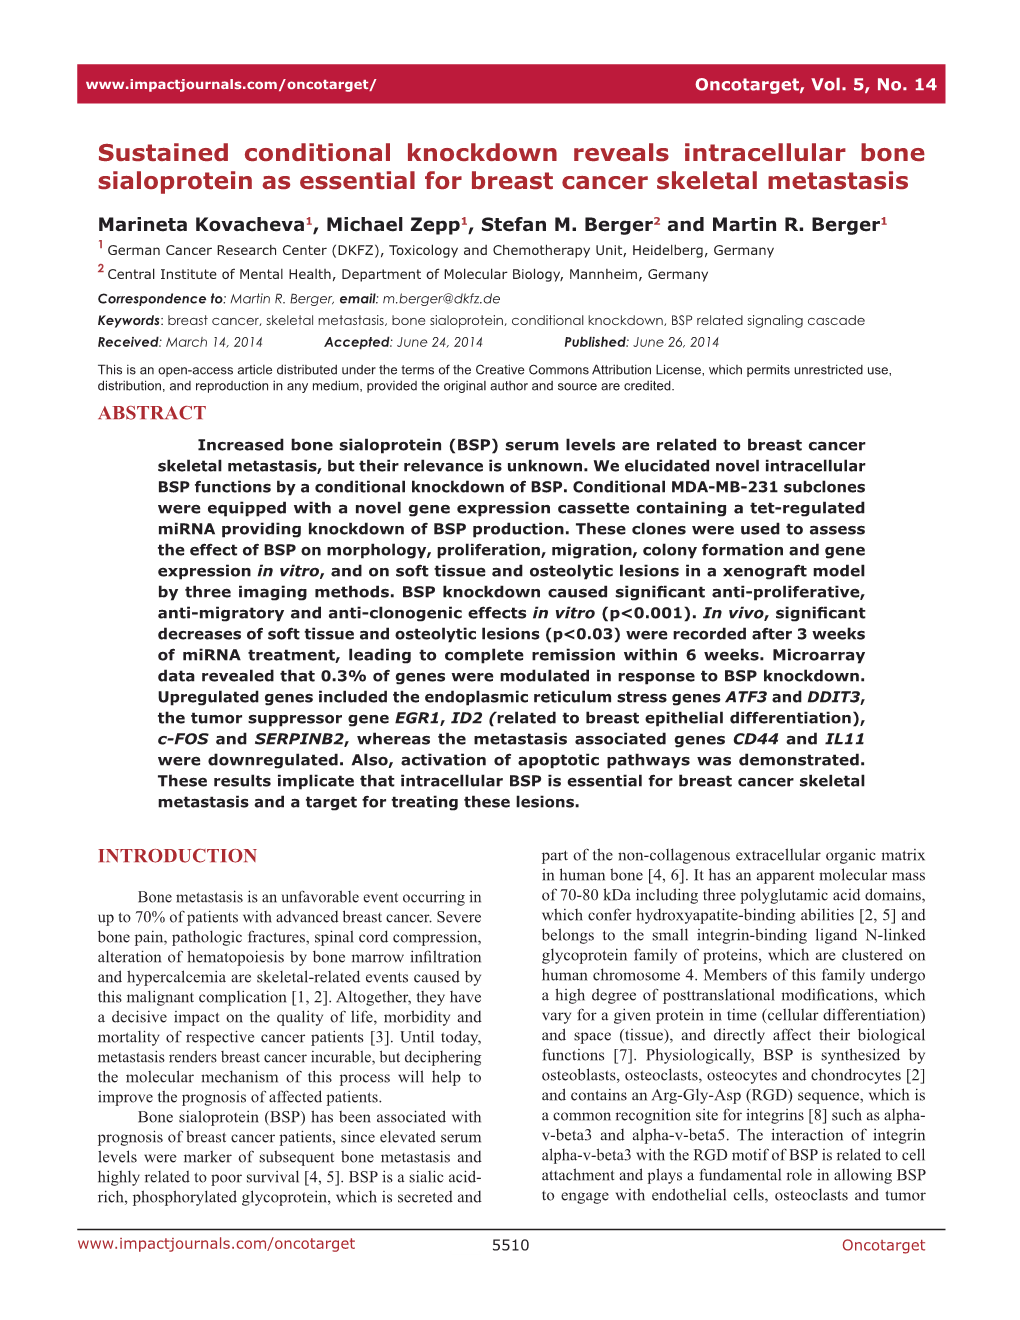 Sustained Conditional Knockdown Reveals Intracellular Bone Sialoprotein As Essential for Breast Cancer Skeletal Metastasis